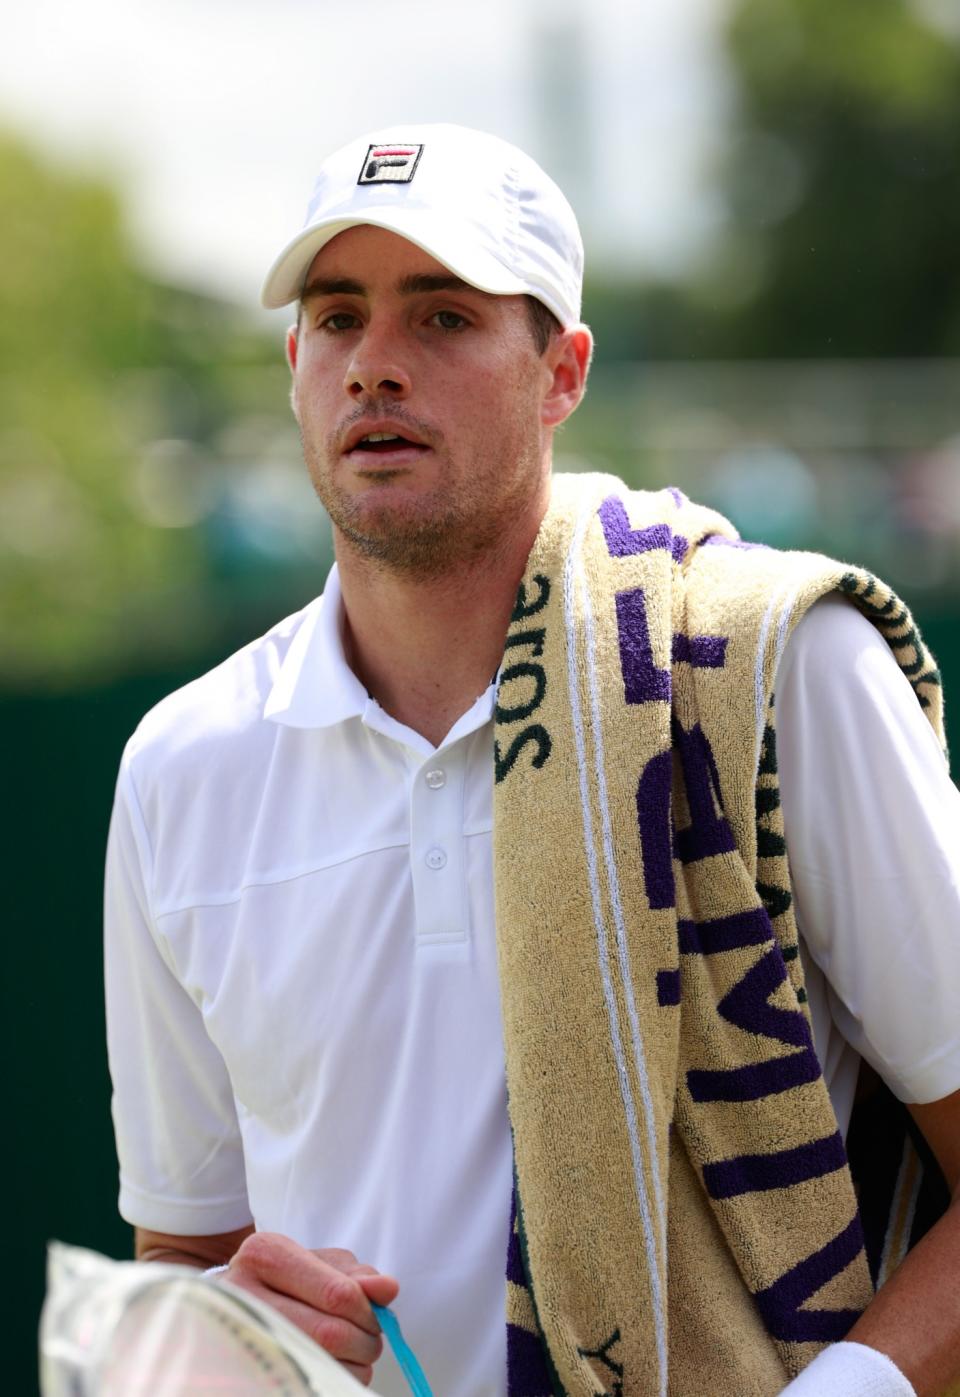 <p>Tennis player John Isner states his schedule is the reason he will not attend Rio this year. (Getty) </p>